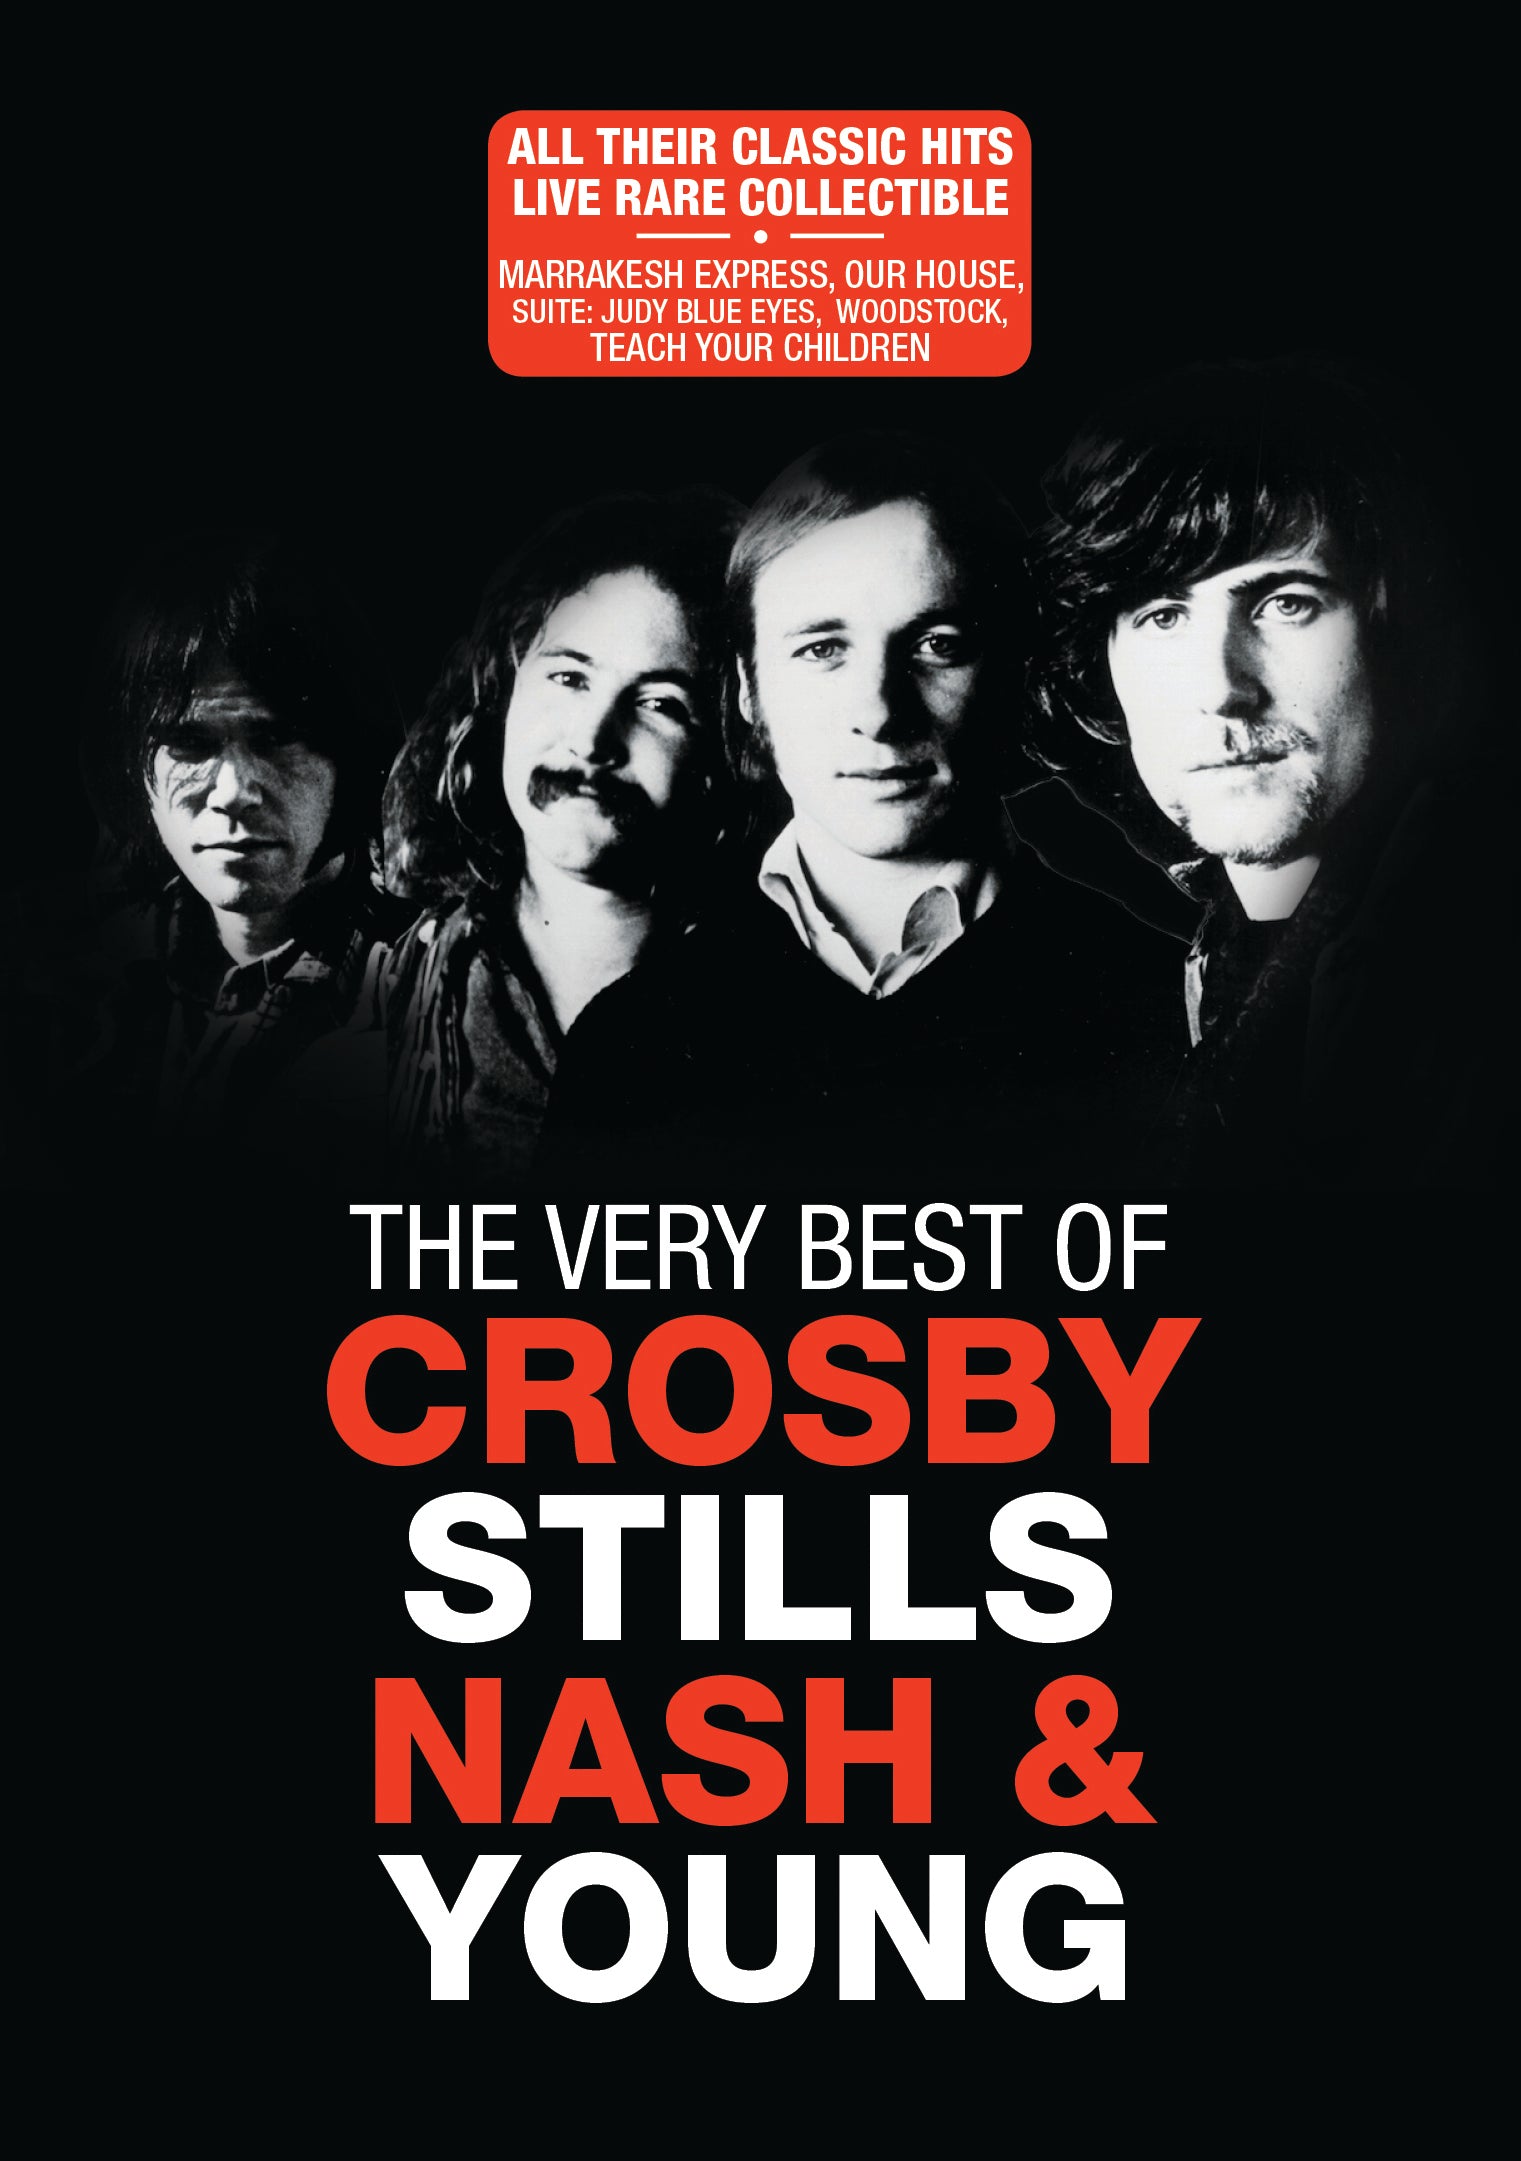 CROSBY, STILLS, NASH & YOUNG - THE VERY BEST OF